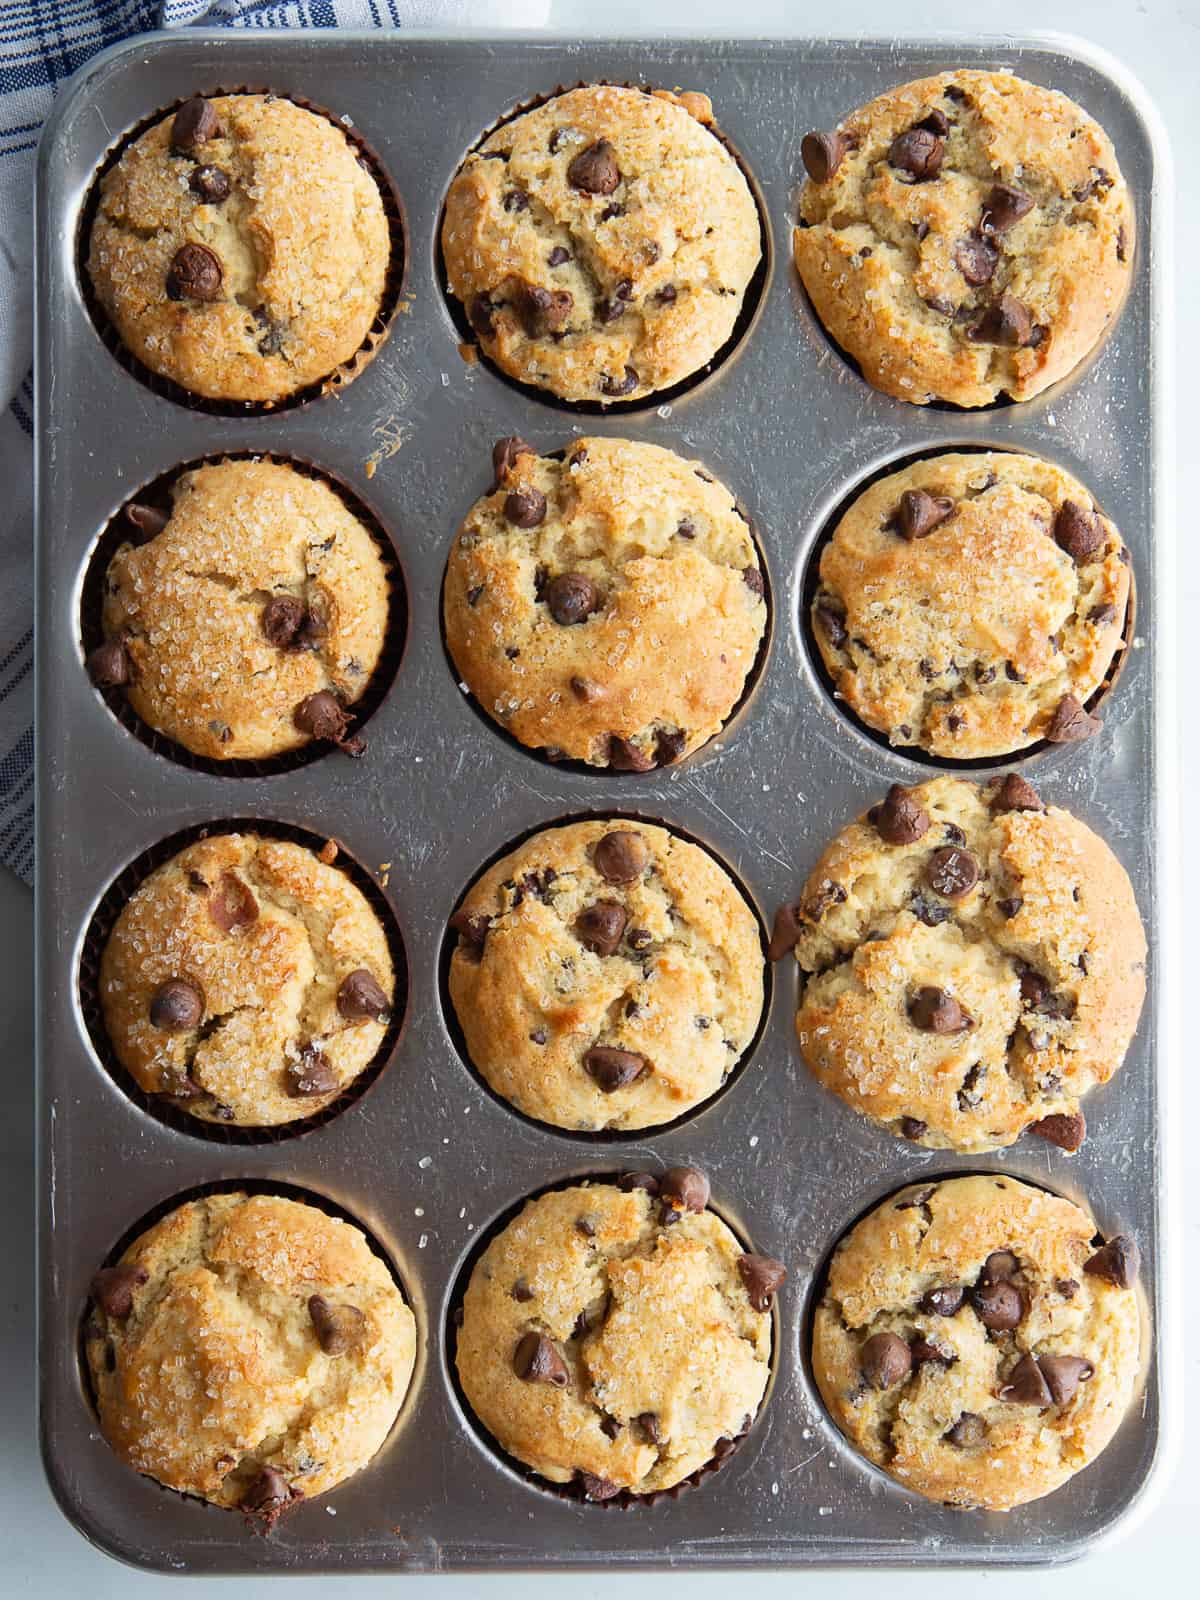 Gluten-free chocolate chip muffins cooling in a muffin pan.